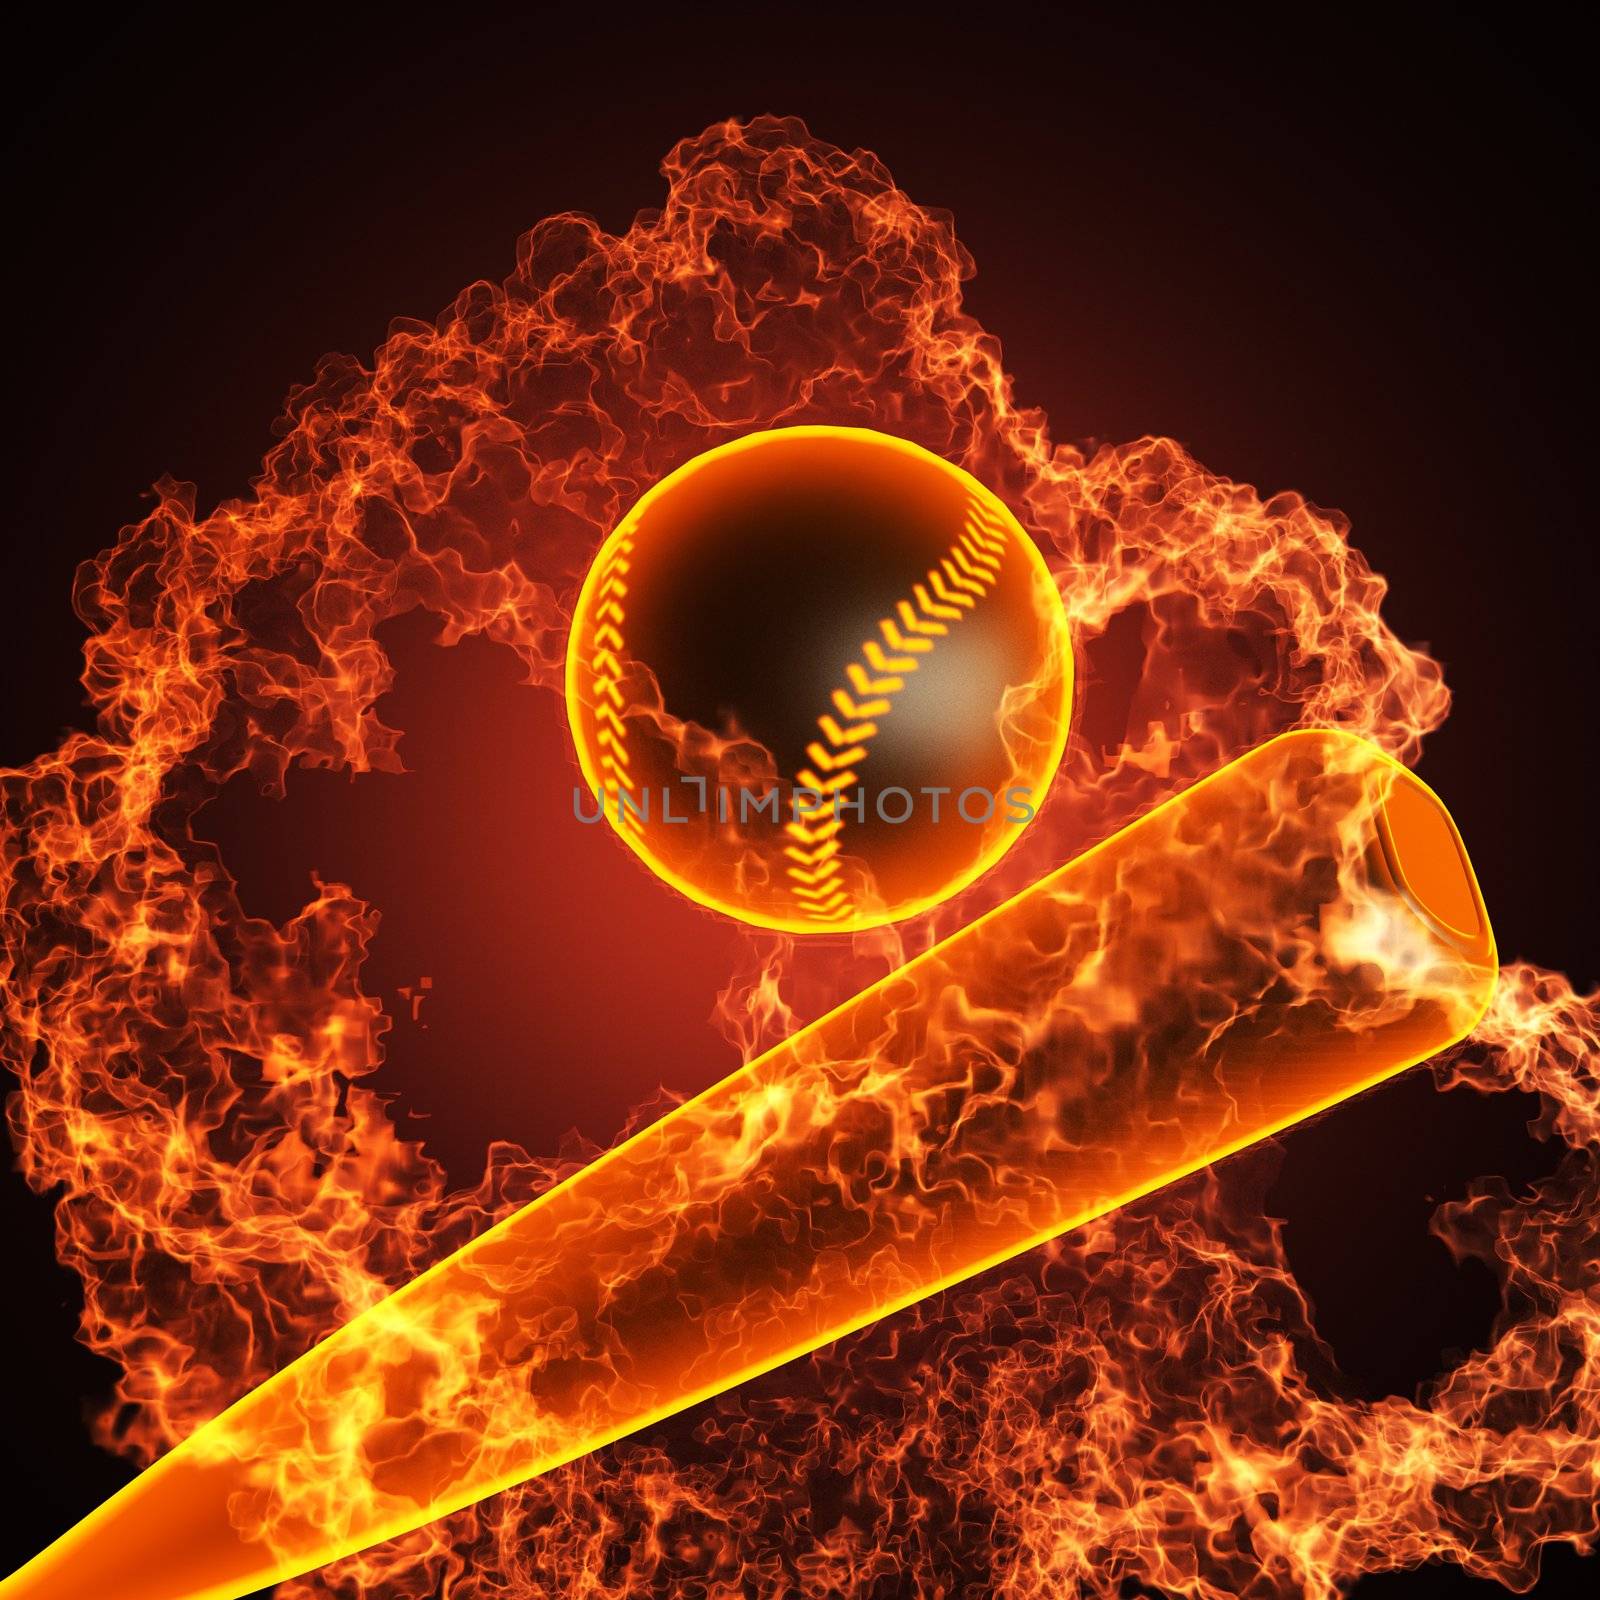 Baseball in fire made in 3D